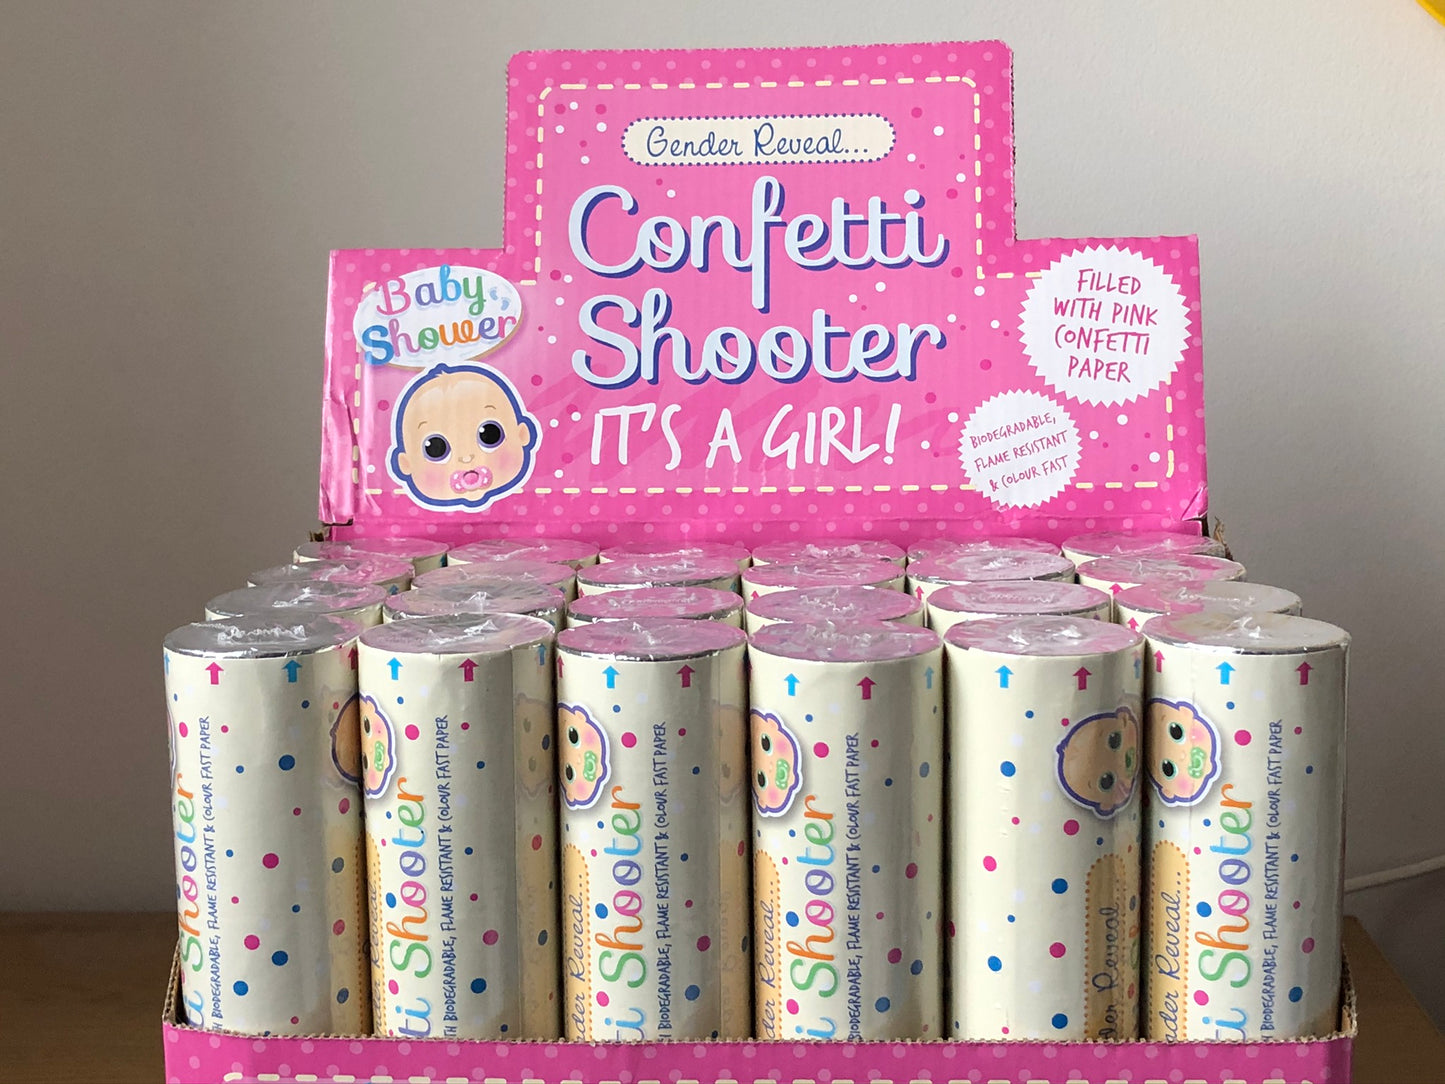 Pink 20cm Gender reveal confetti cannons in display box